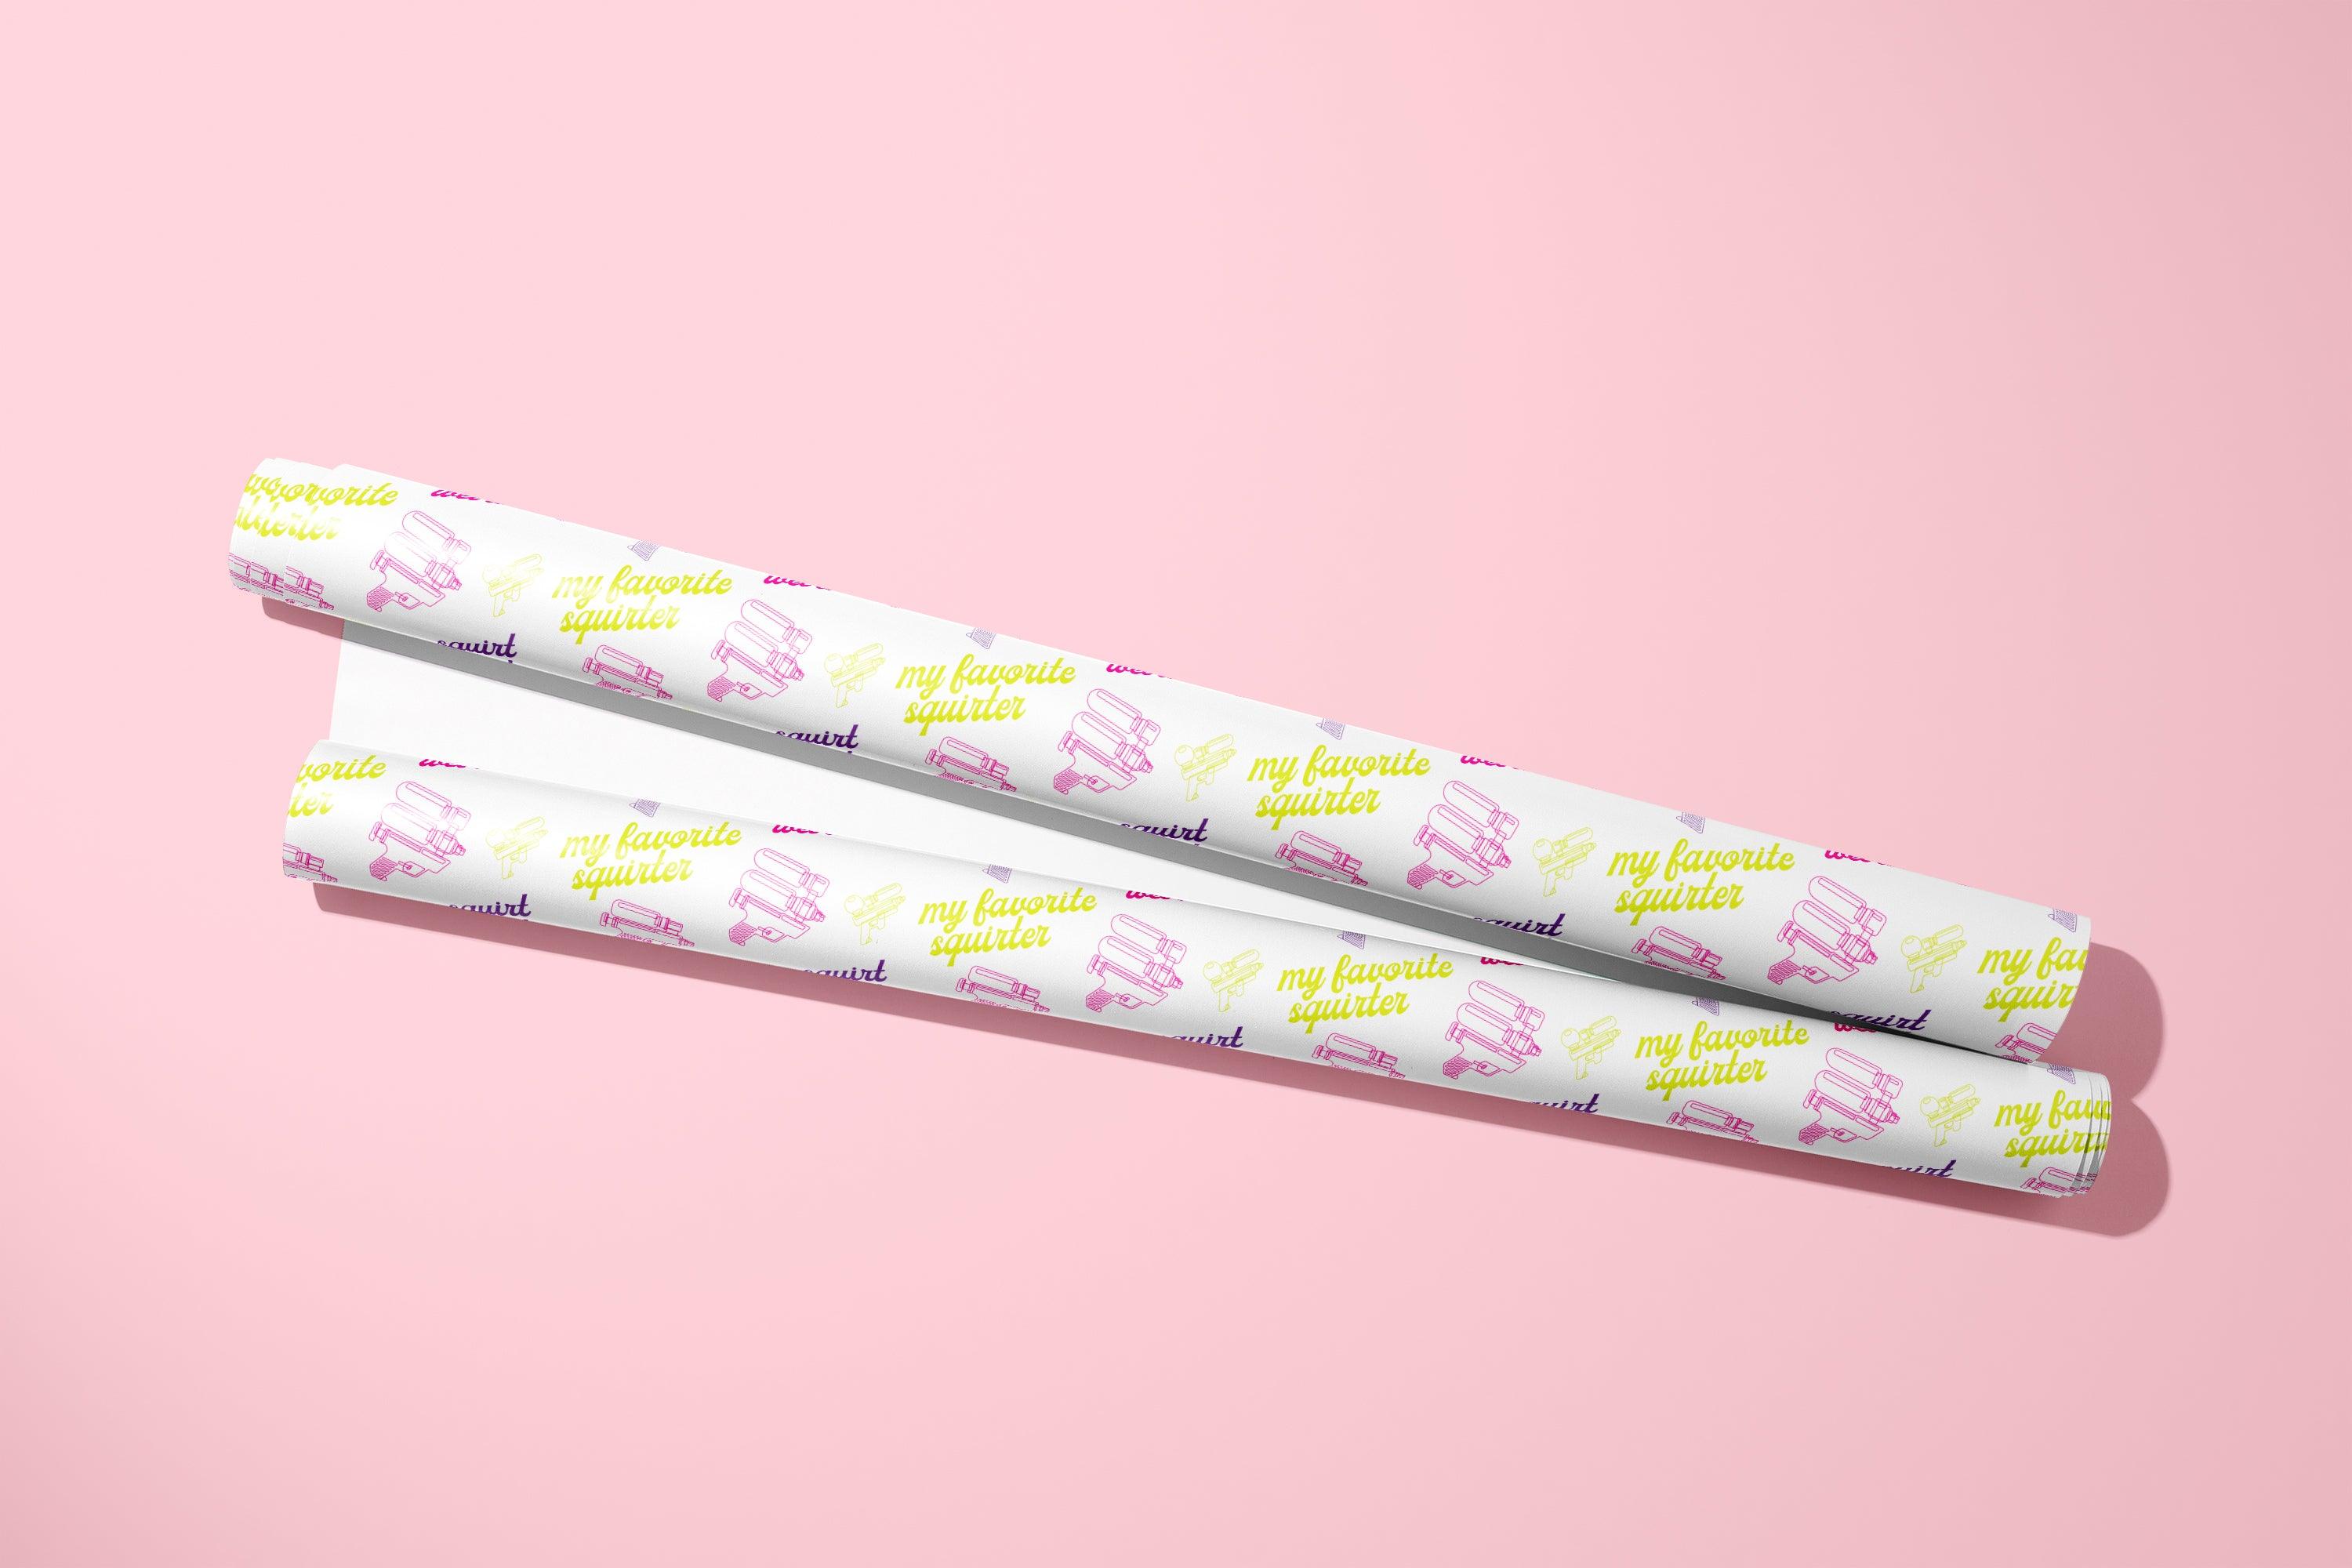 🔫 Squirt Alert Naughty Wrapping Paper - KushKards 22&quot; x 29&quot; wide and has 3 sheets per roll with squirt gun print